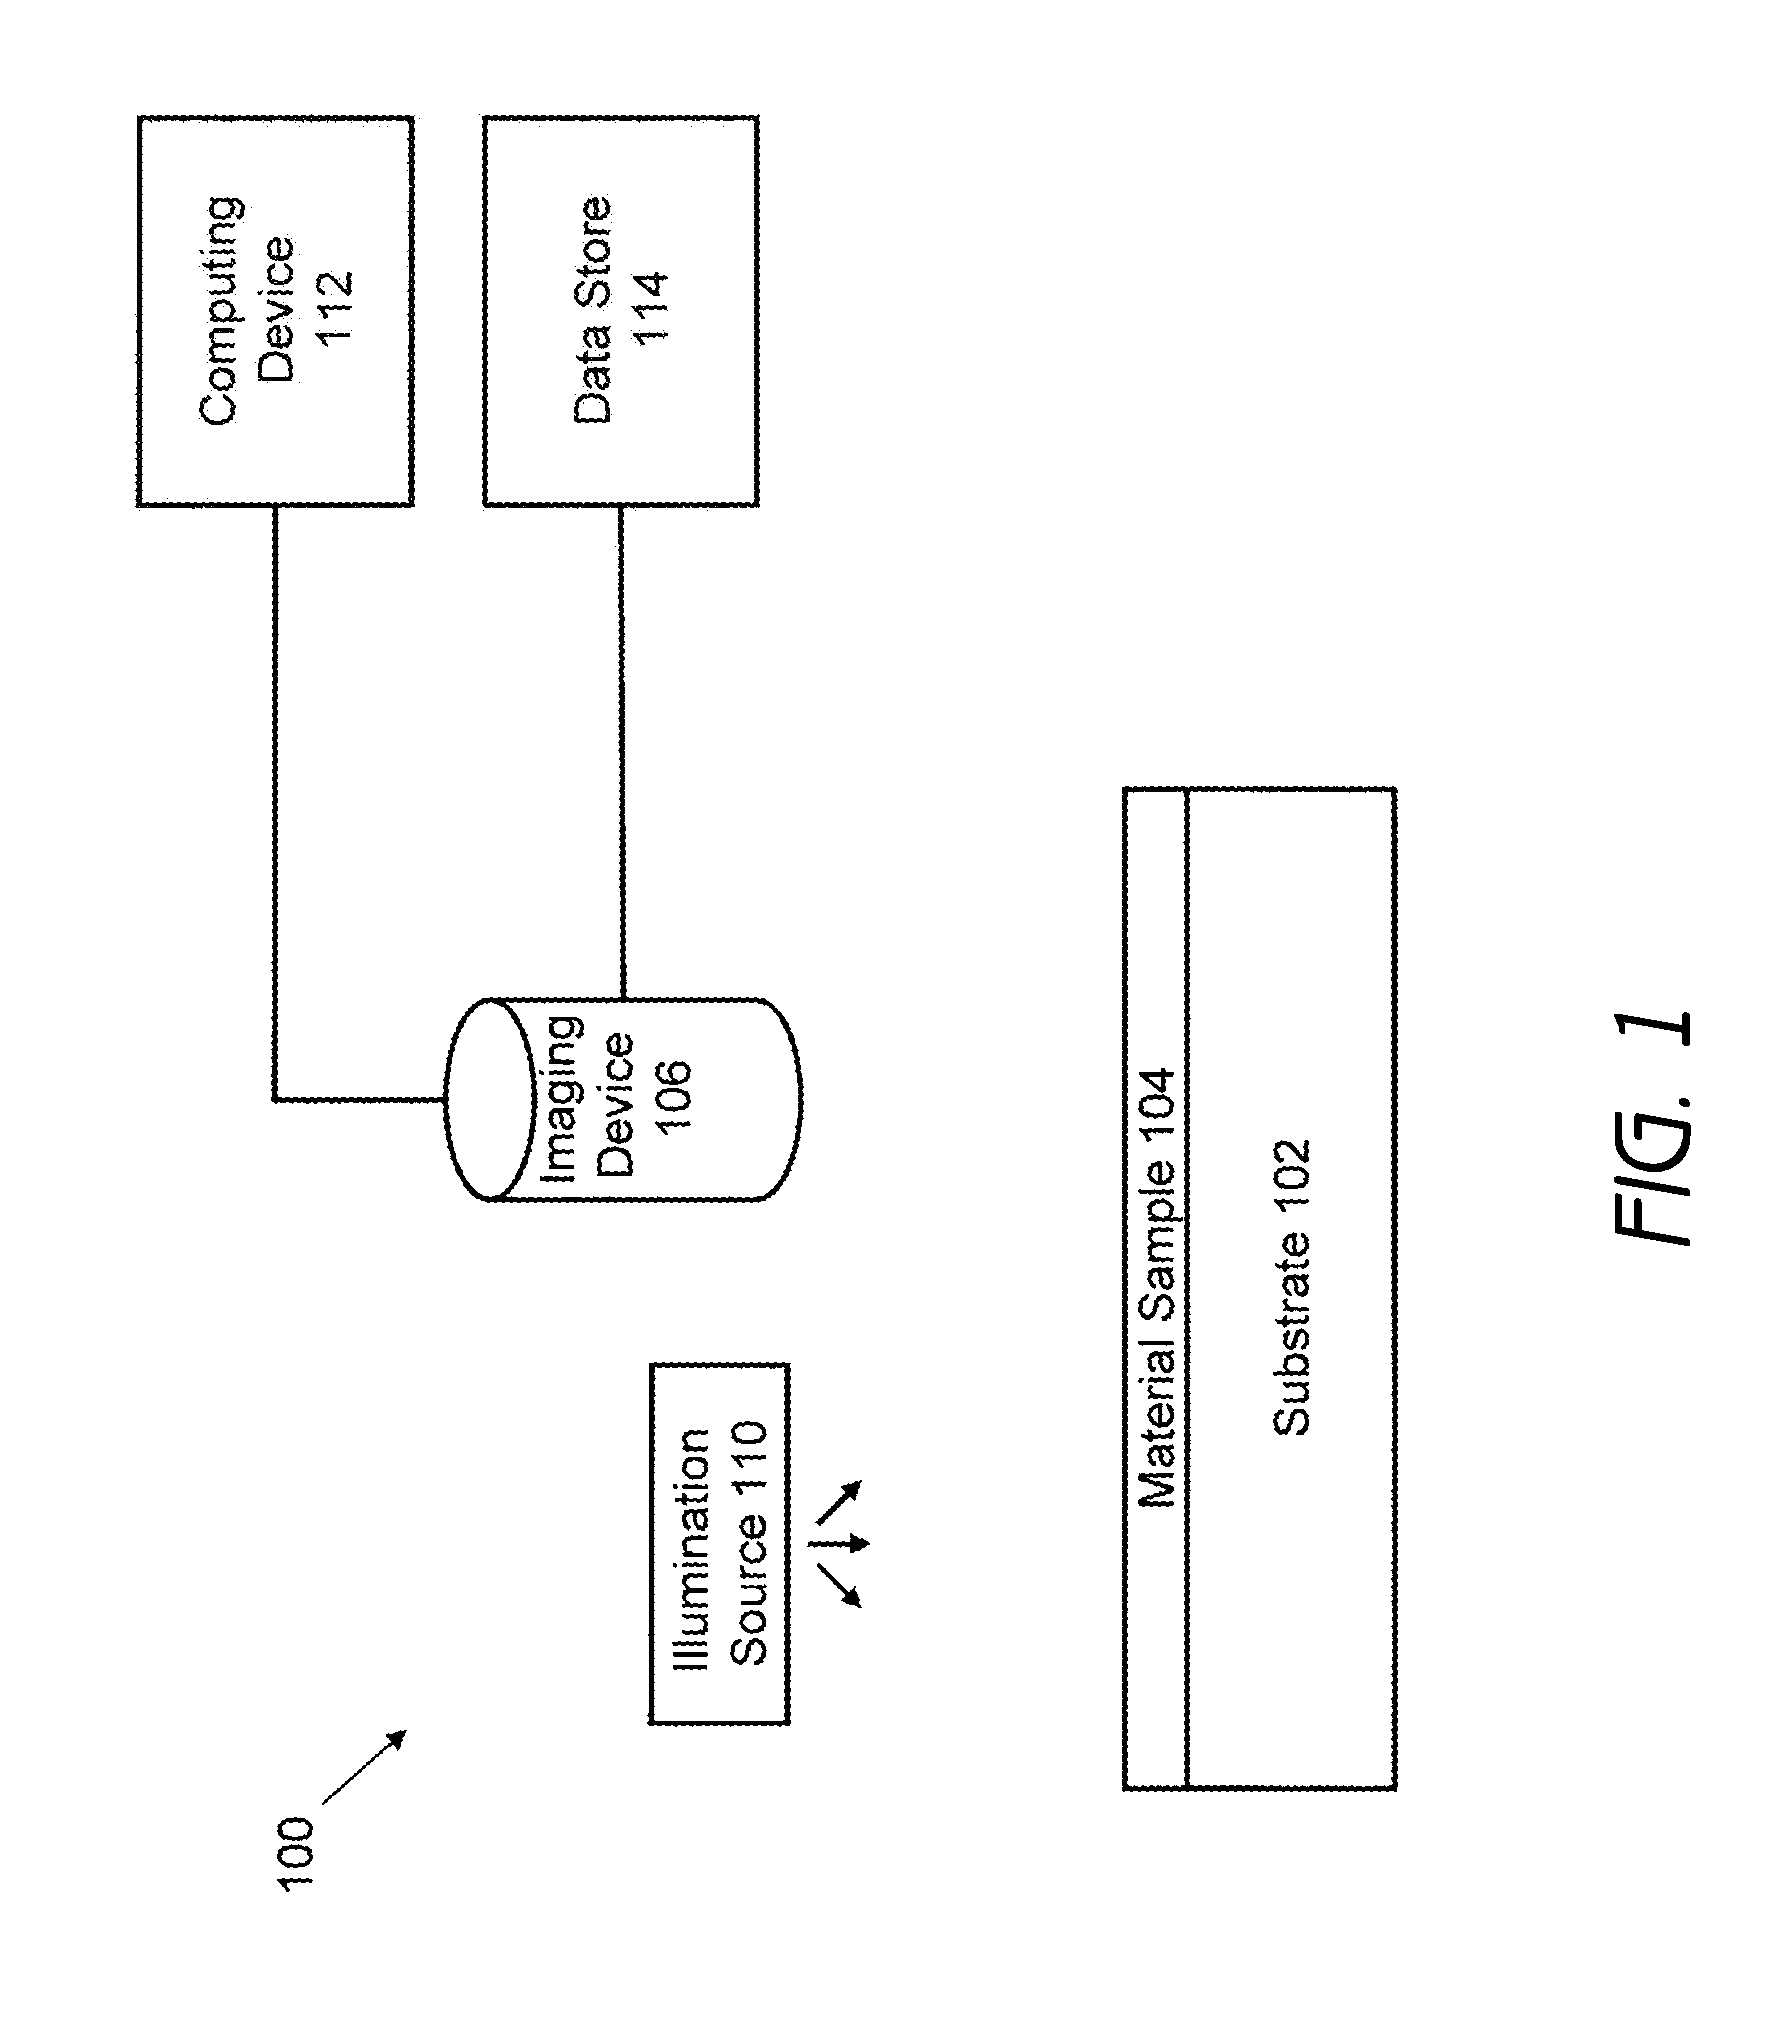 Systems and methods for material layer identification through image processing